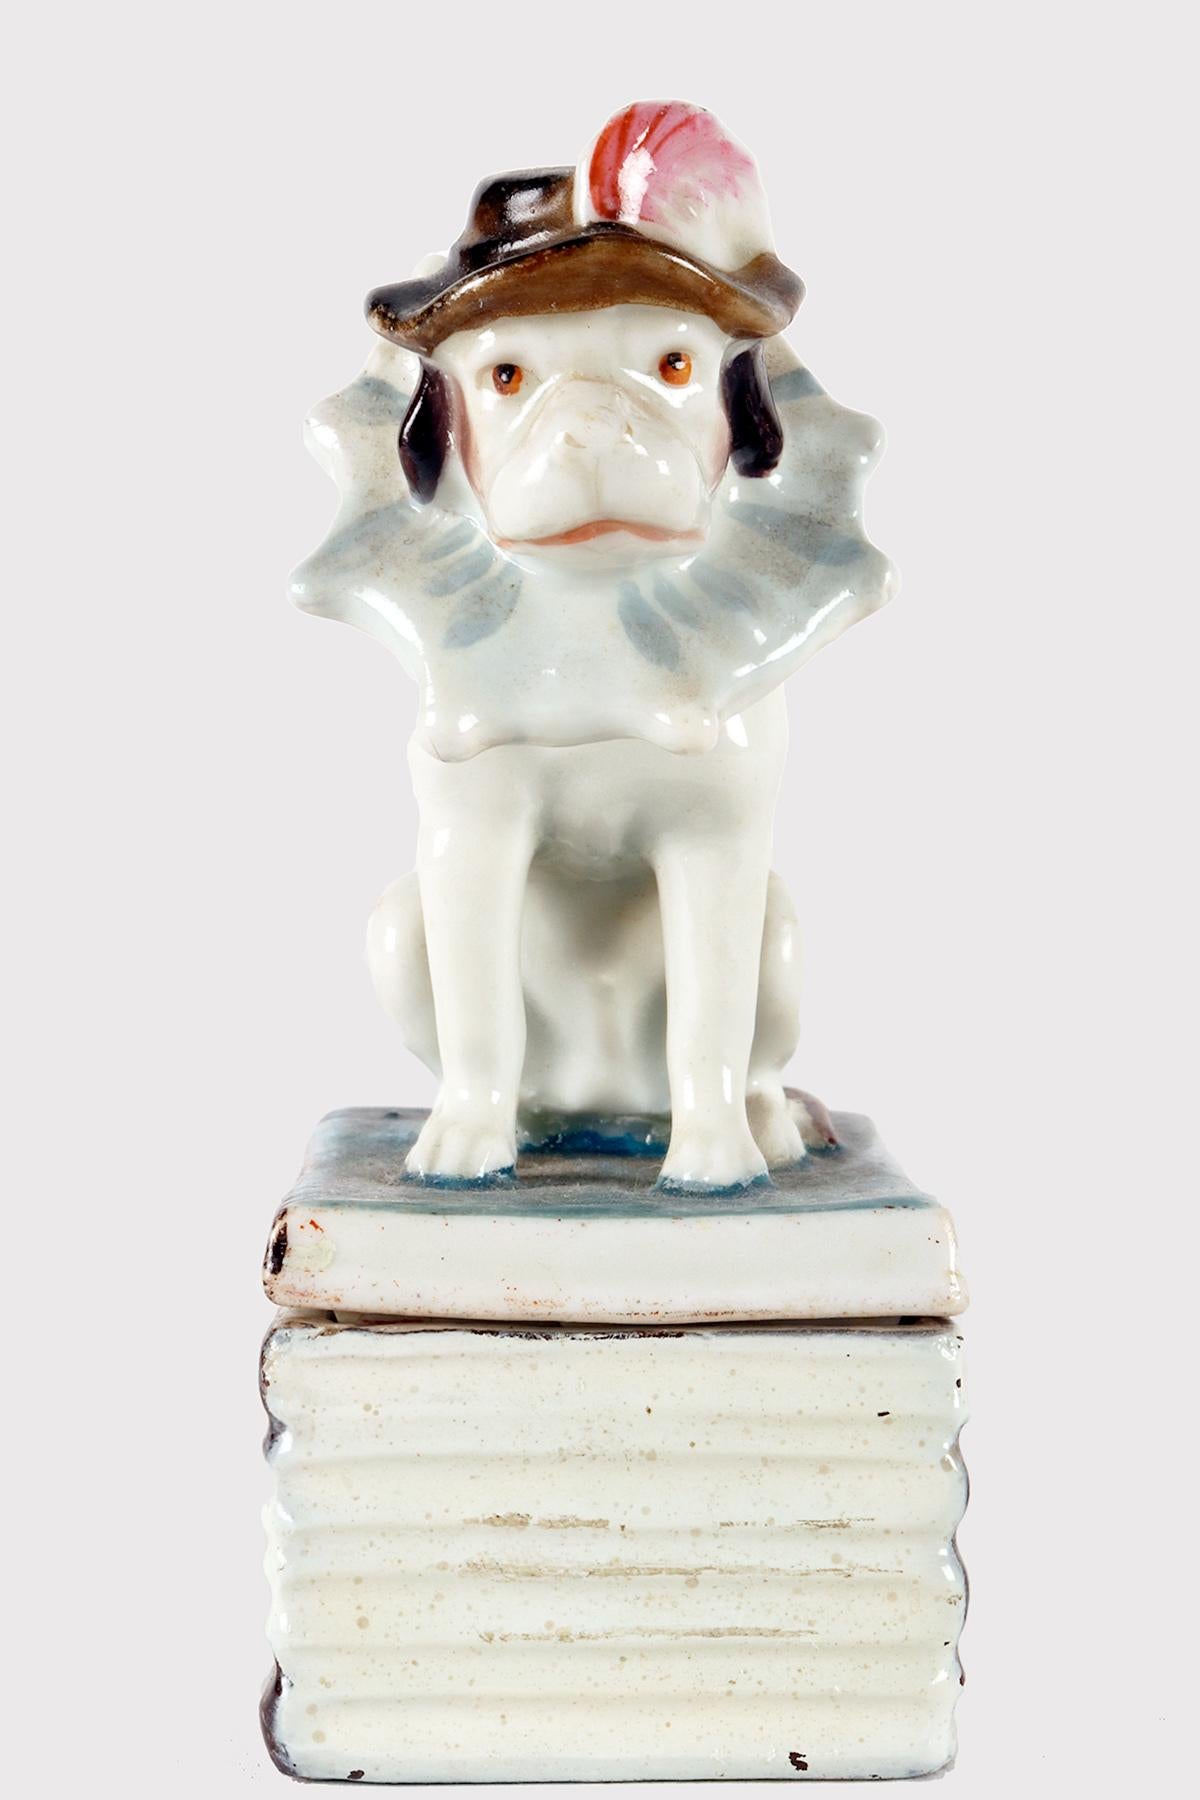 Rectangular box in painted porcelain, in the shape of stacked books. The base and lid are supported. Above the first book at the top, in the shape of a lid, there is a sitting dog, a King Charles Cavalier, with a plumed hat and ruff. The entire box